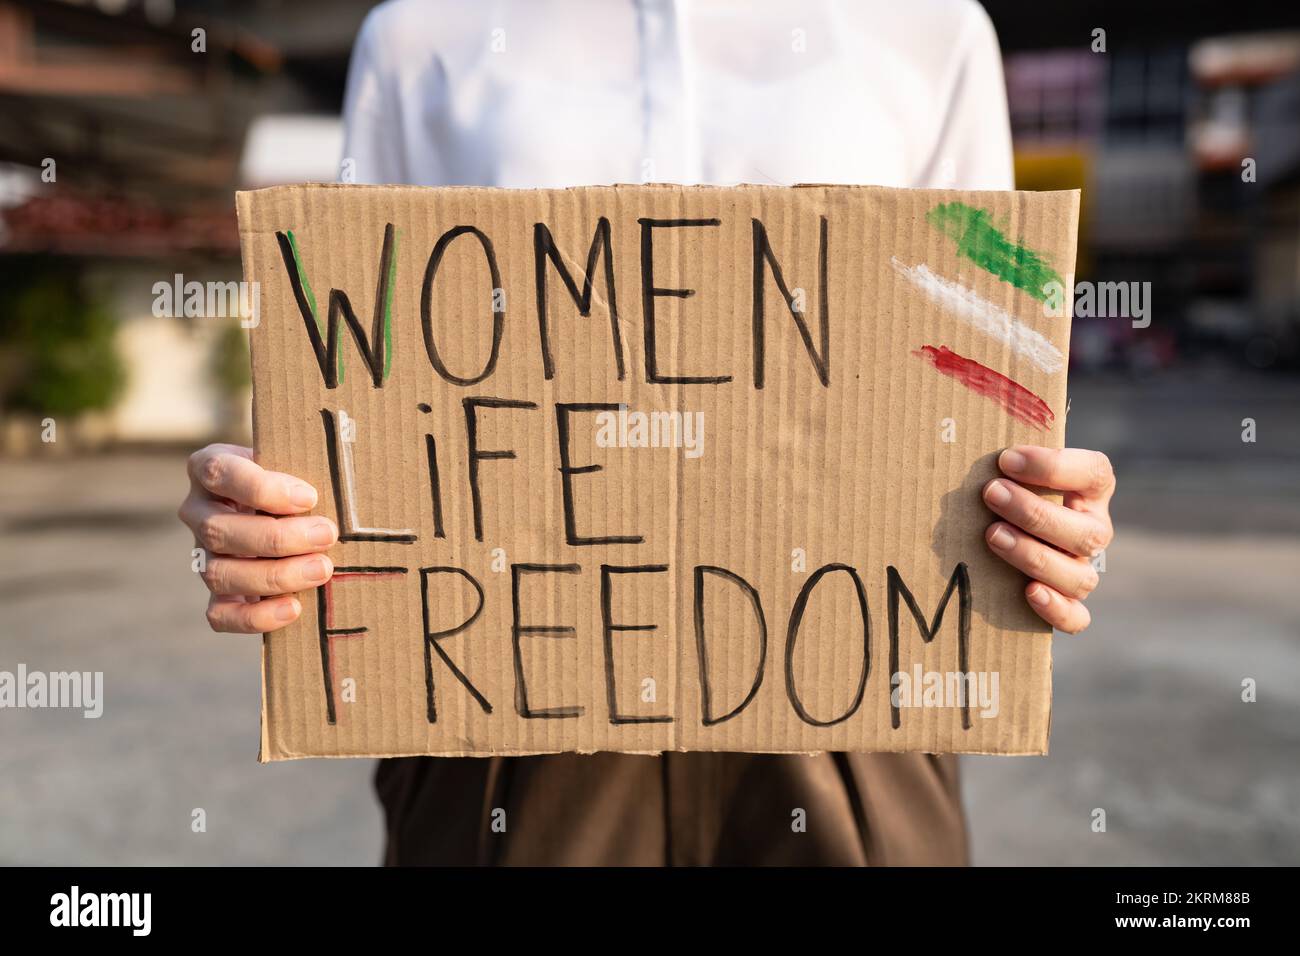 Woman protesting for women's rights in Iran Stock Photo